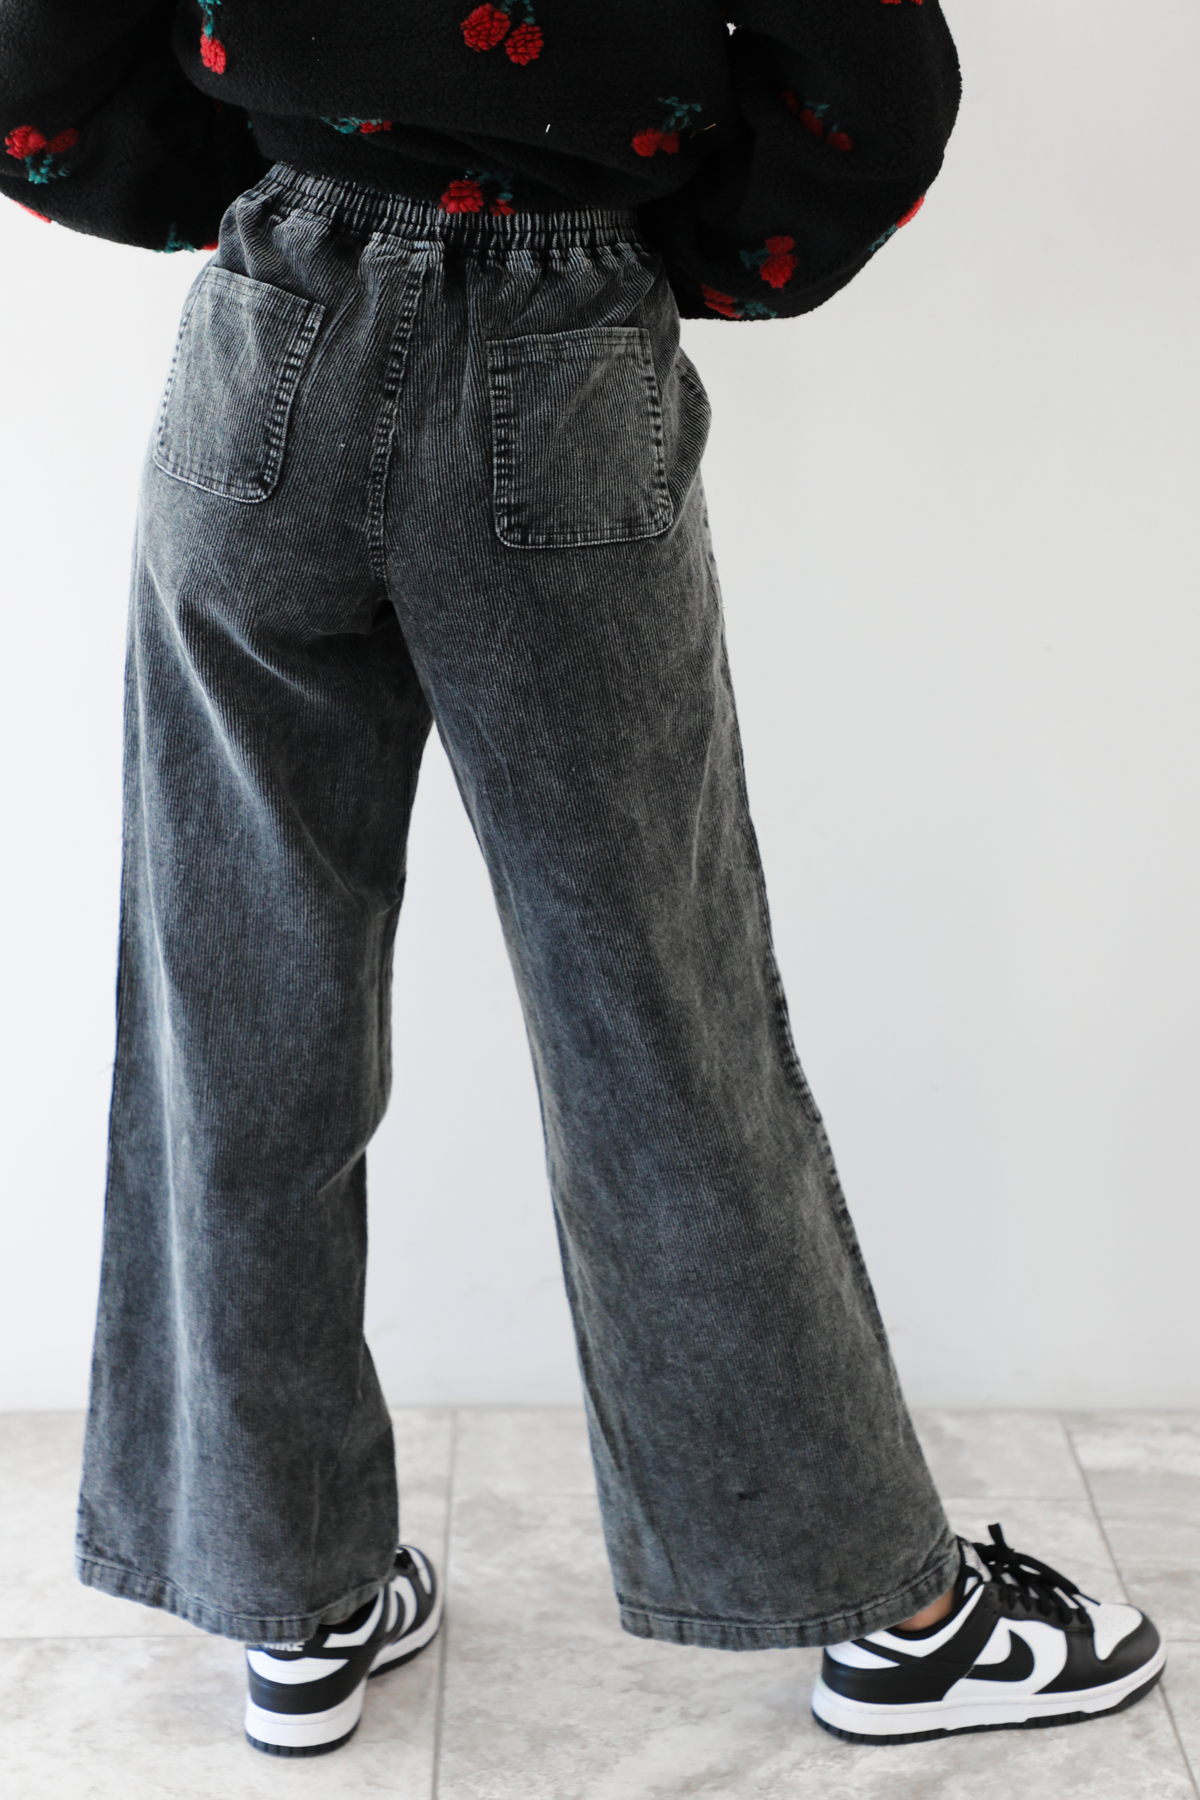 Don't Fade Away Pants: Distressed Black